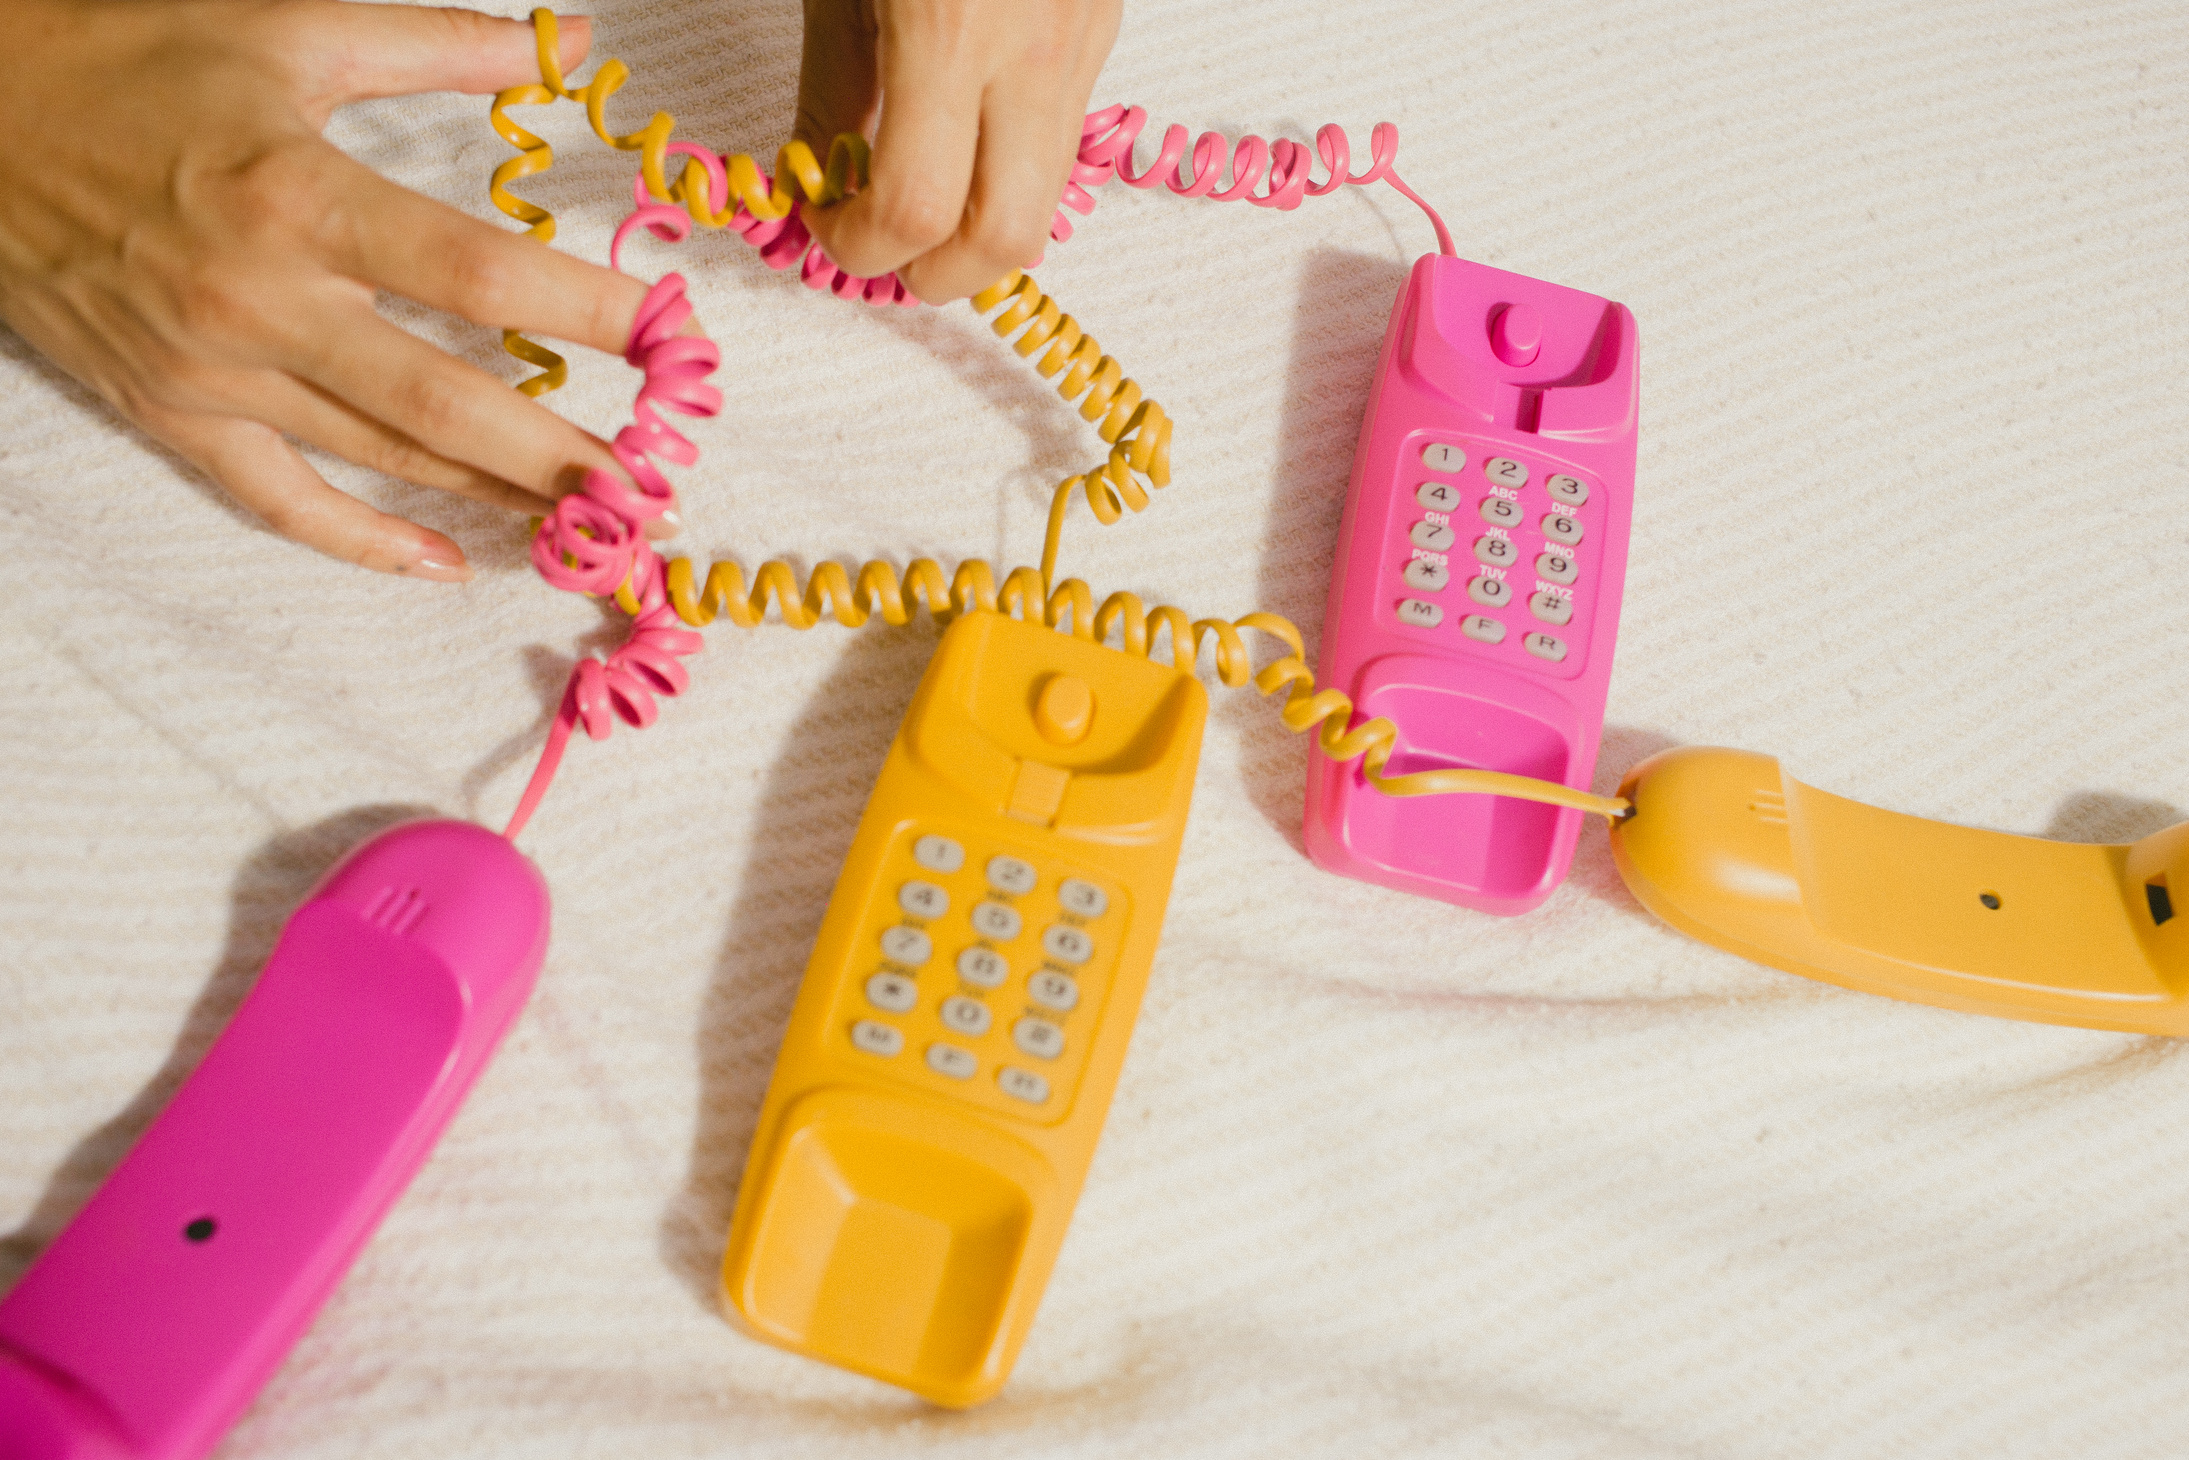 Pink and Yellow Telephones  